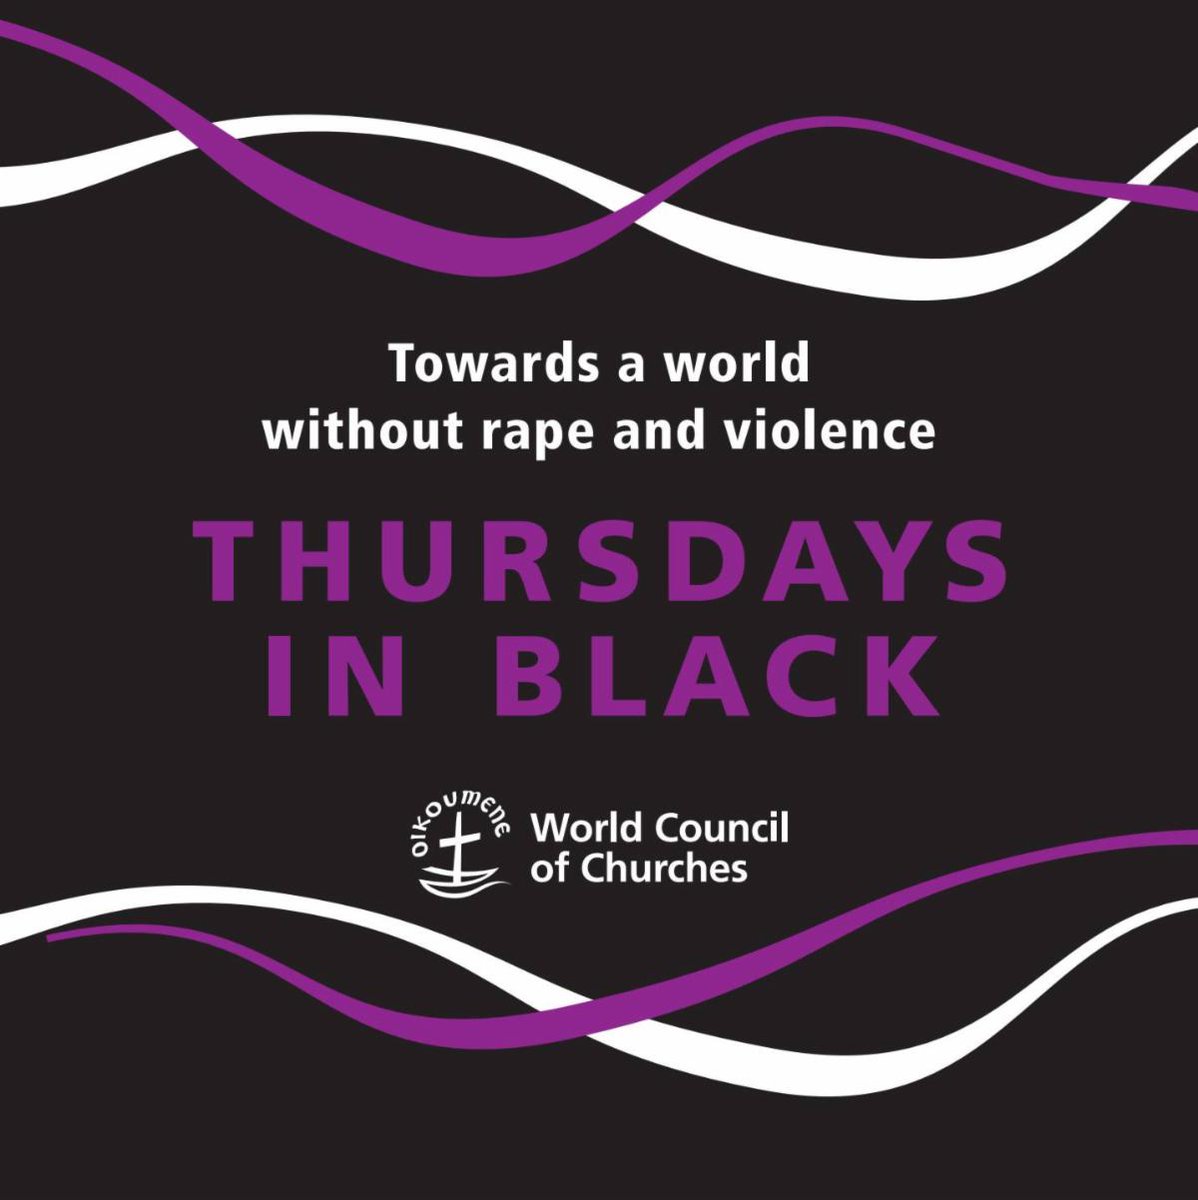 The @Oikoumene has invited the #ccdoc to participate in #ThursdaysinBlack. Wear black on Thursdays to declare that you are part of the global movement resisting attitudes & practices that permit rape & violence. Post a pic & tag #ccdocThursdaysinBlack